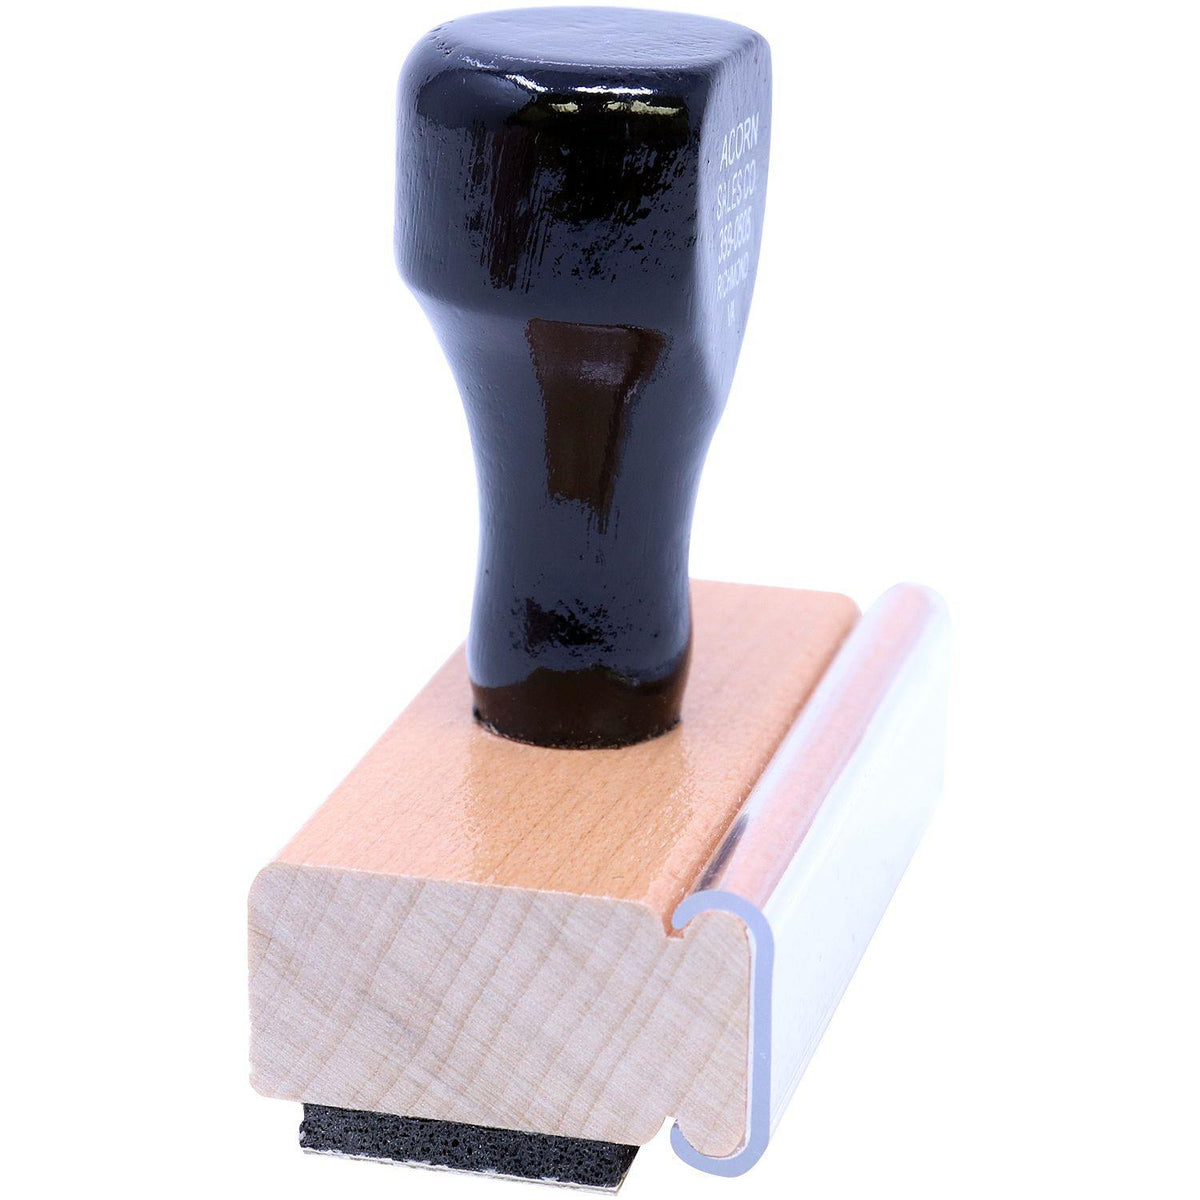 Side View of Way To Go Rubber Stamp at an Angle